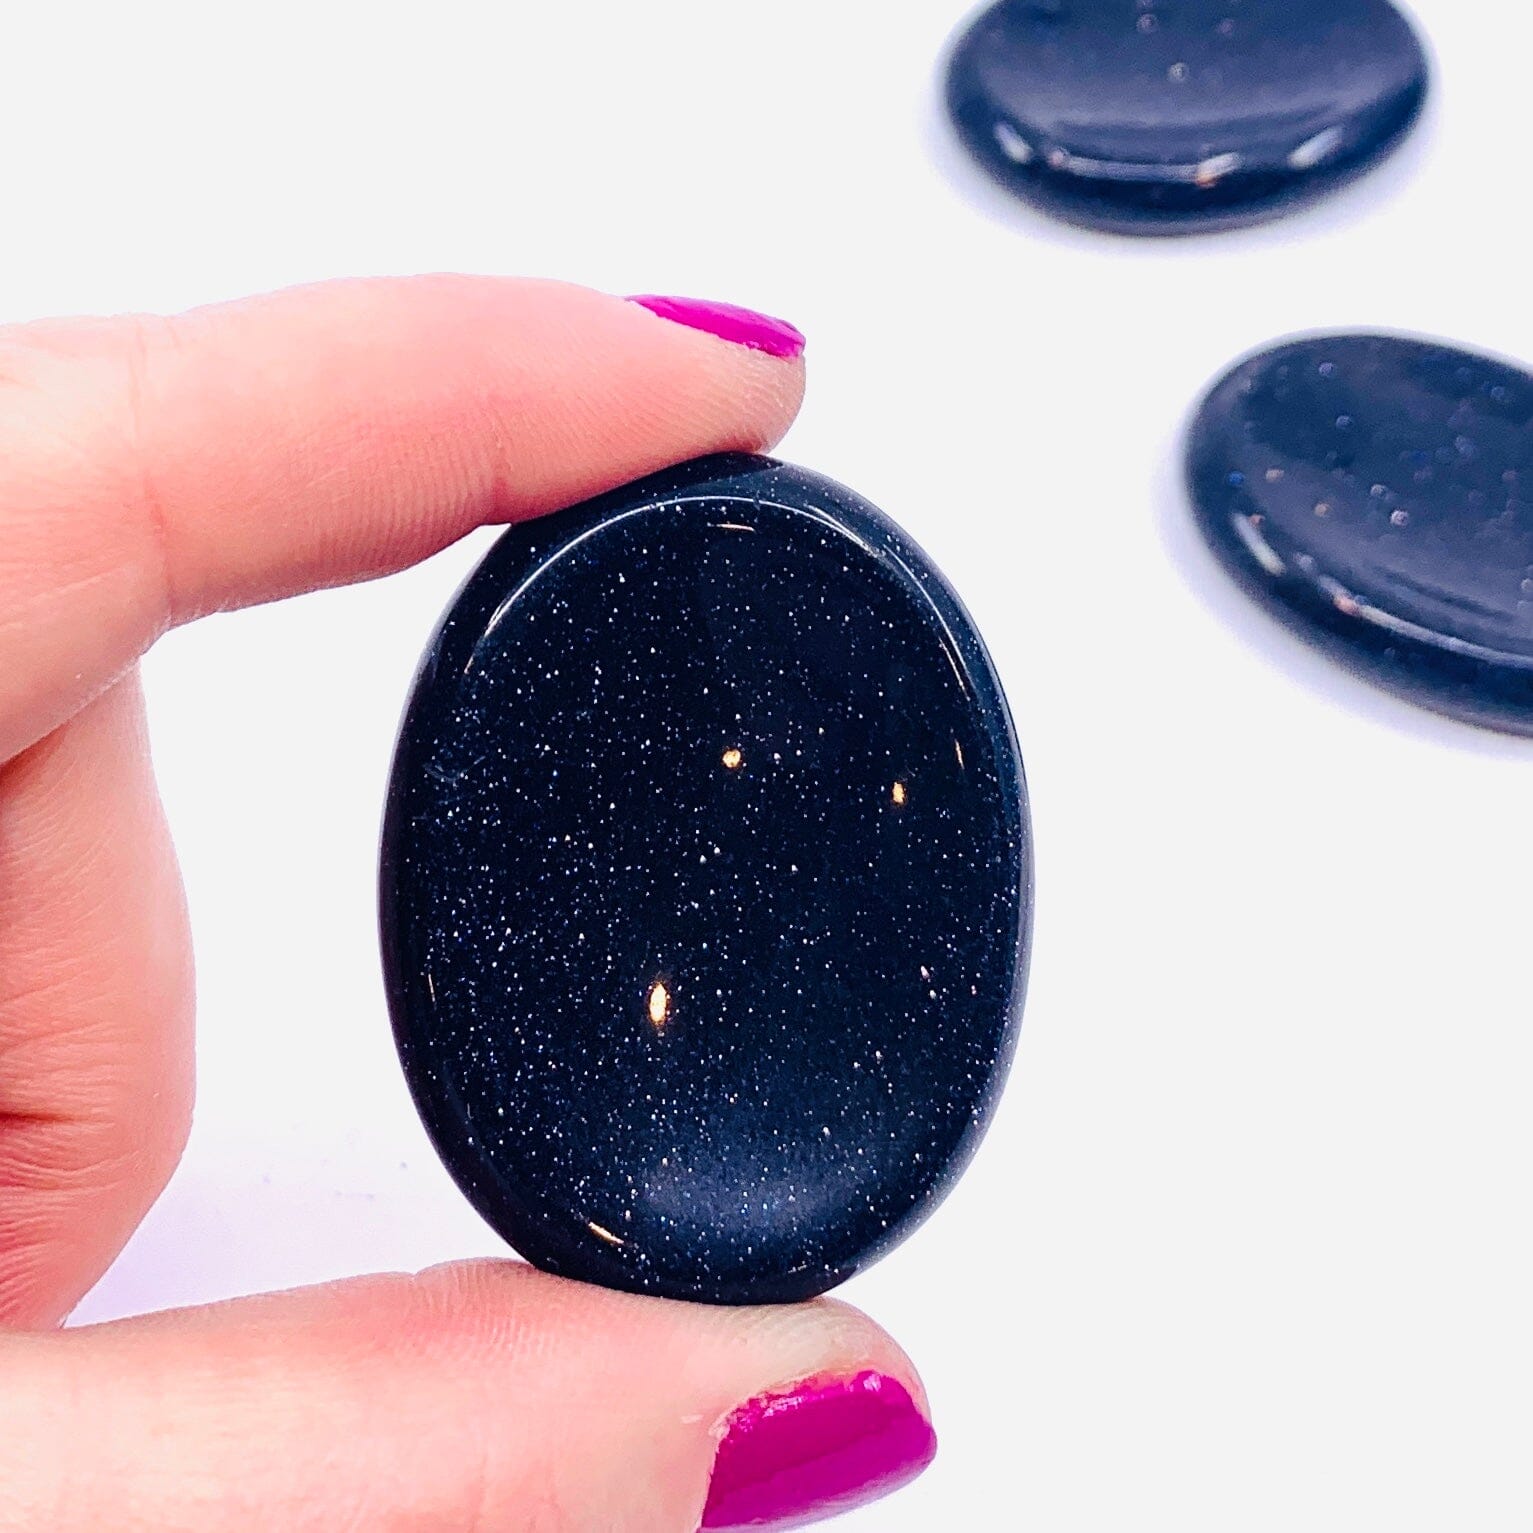 Blue Goldstone Soothing Stone Decor Earth's Elements 